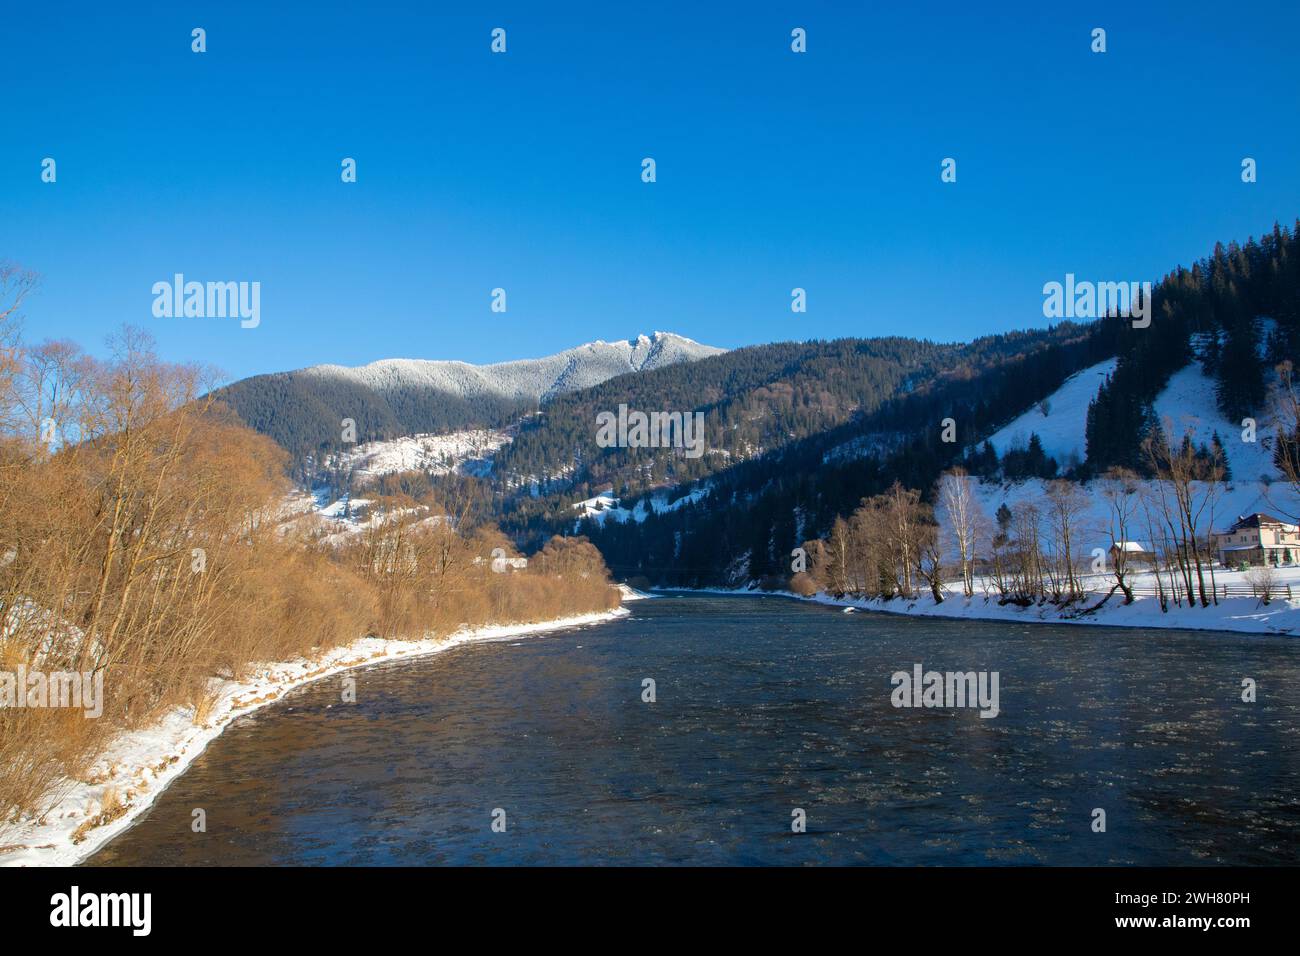 Snow-covered ground and river with a majestic mountain in the background Stock Photo